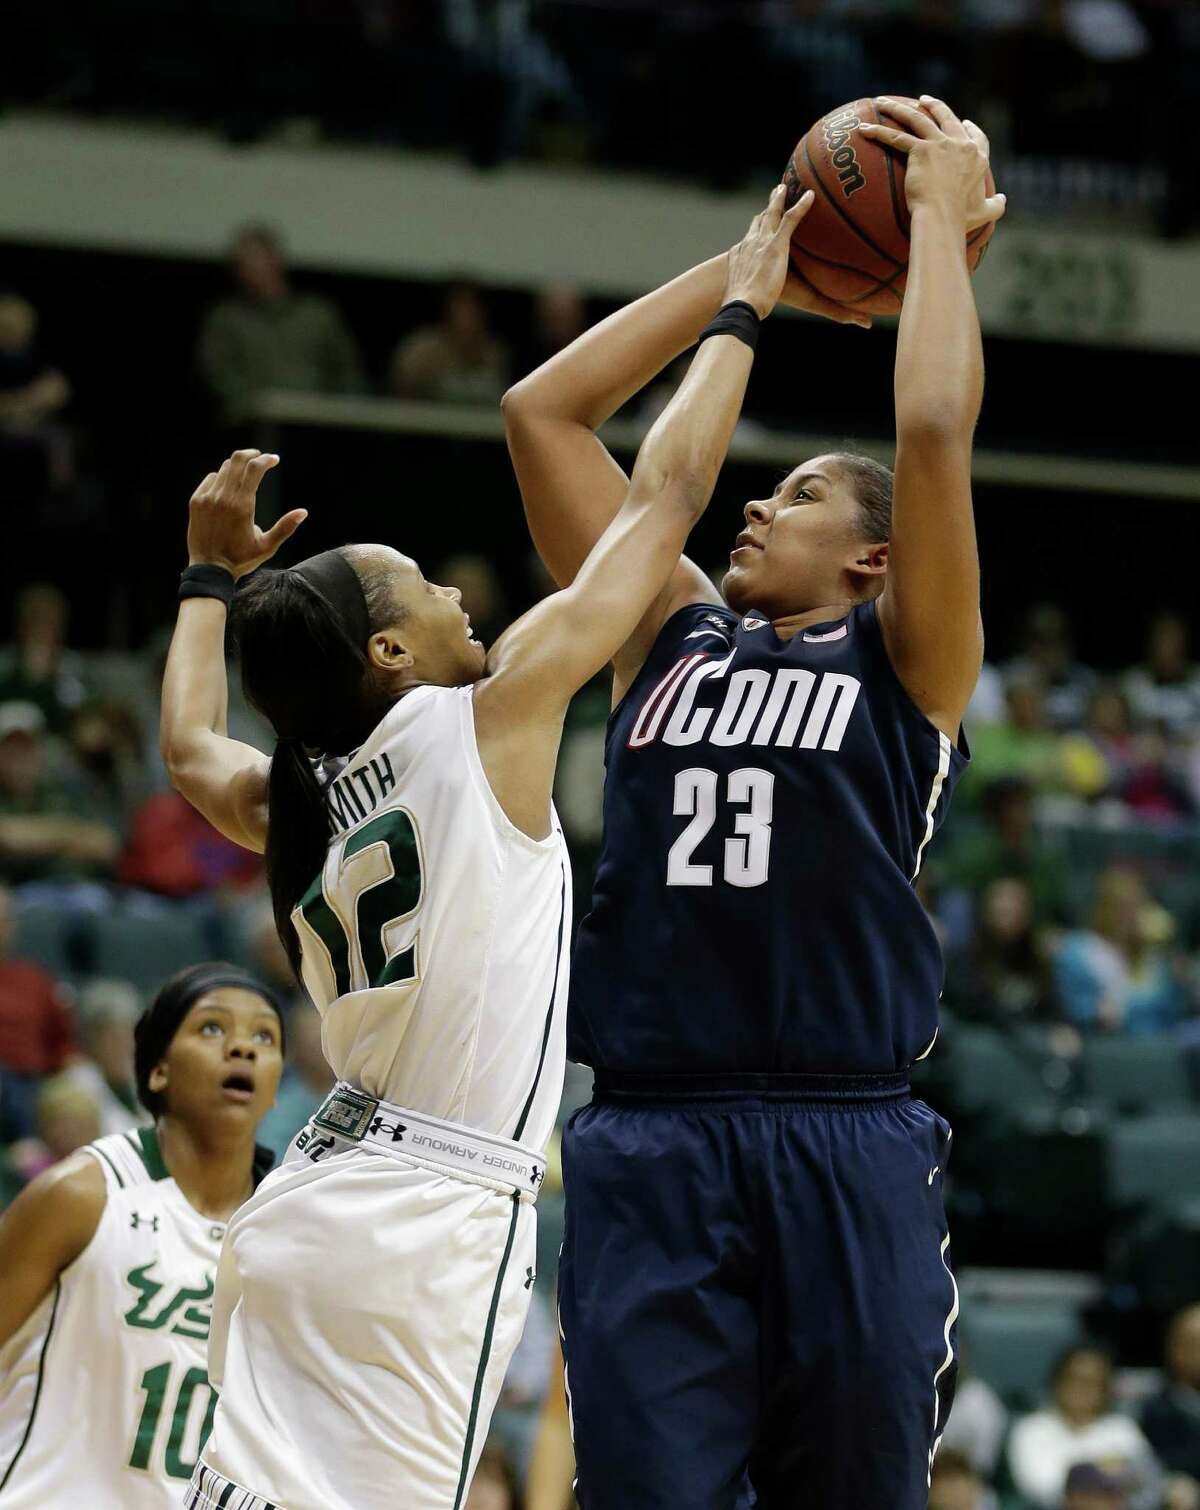 Connecticut forward Kaleena Mosqueda-Lewis (23) shoots over South Florida guard Andrell Smith (12) during the second half of an NCAA women's college basketball game Saturday, March 2, 2013, in Tampa, Fla. Connecticut won the game 85-51. (AP Photo/Chris O'Meara)